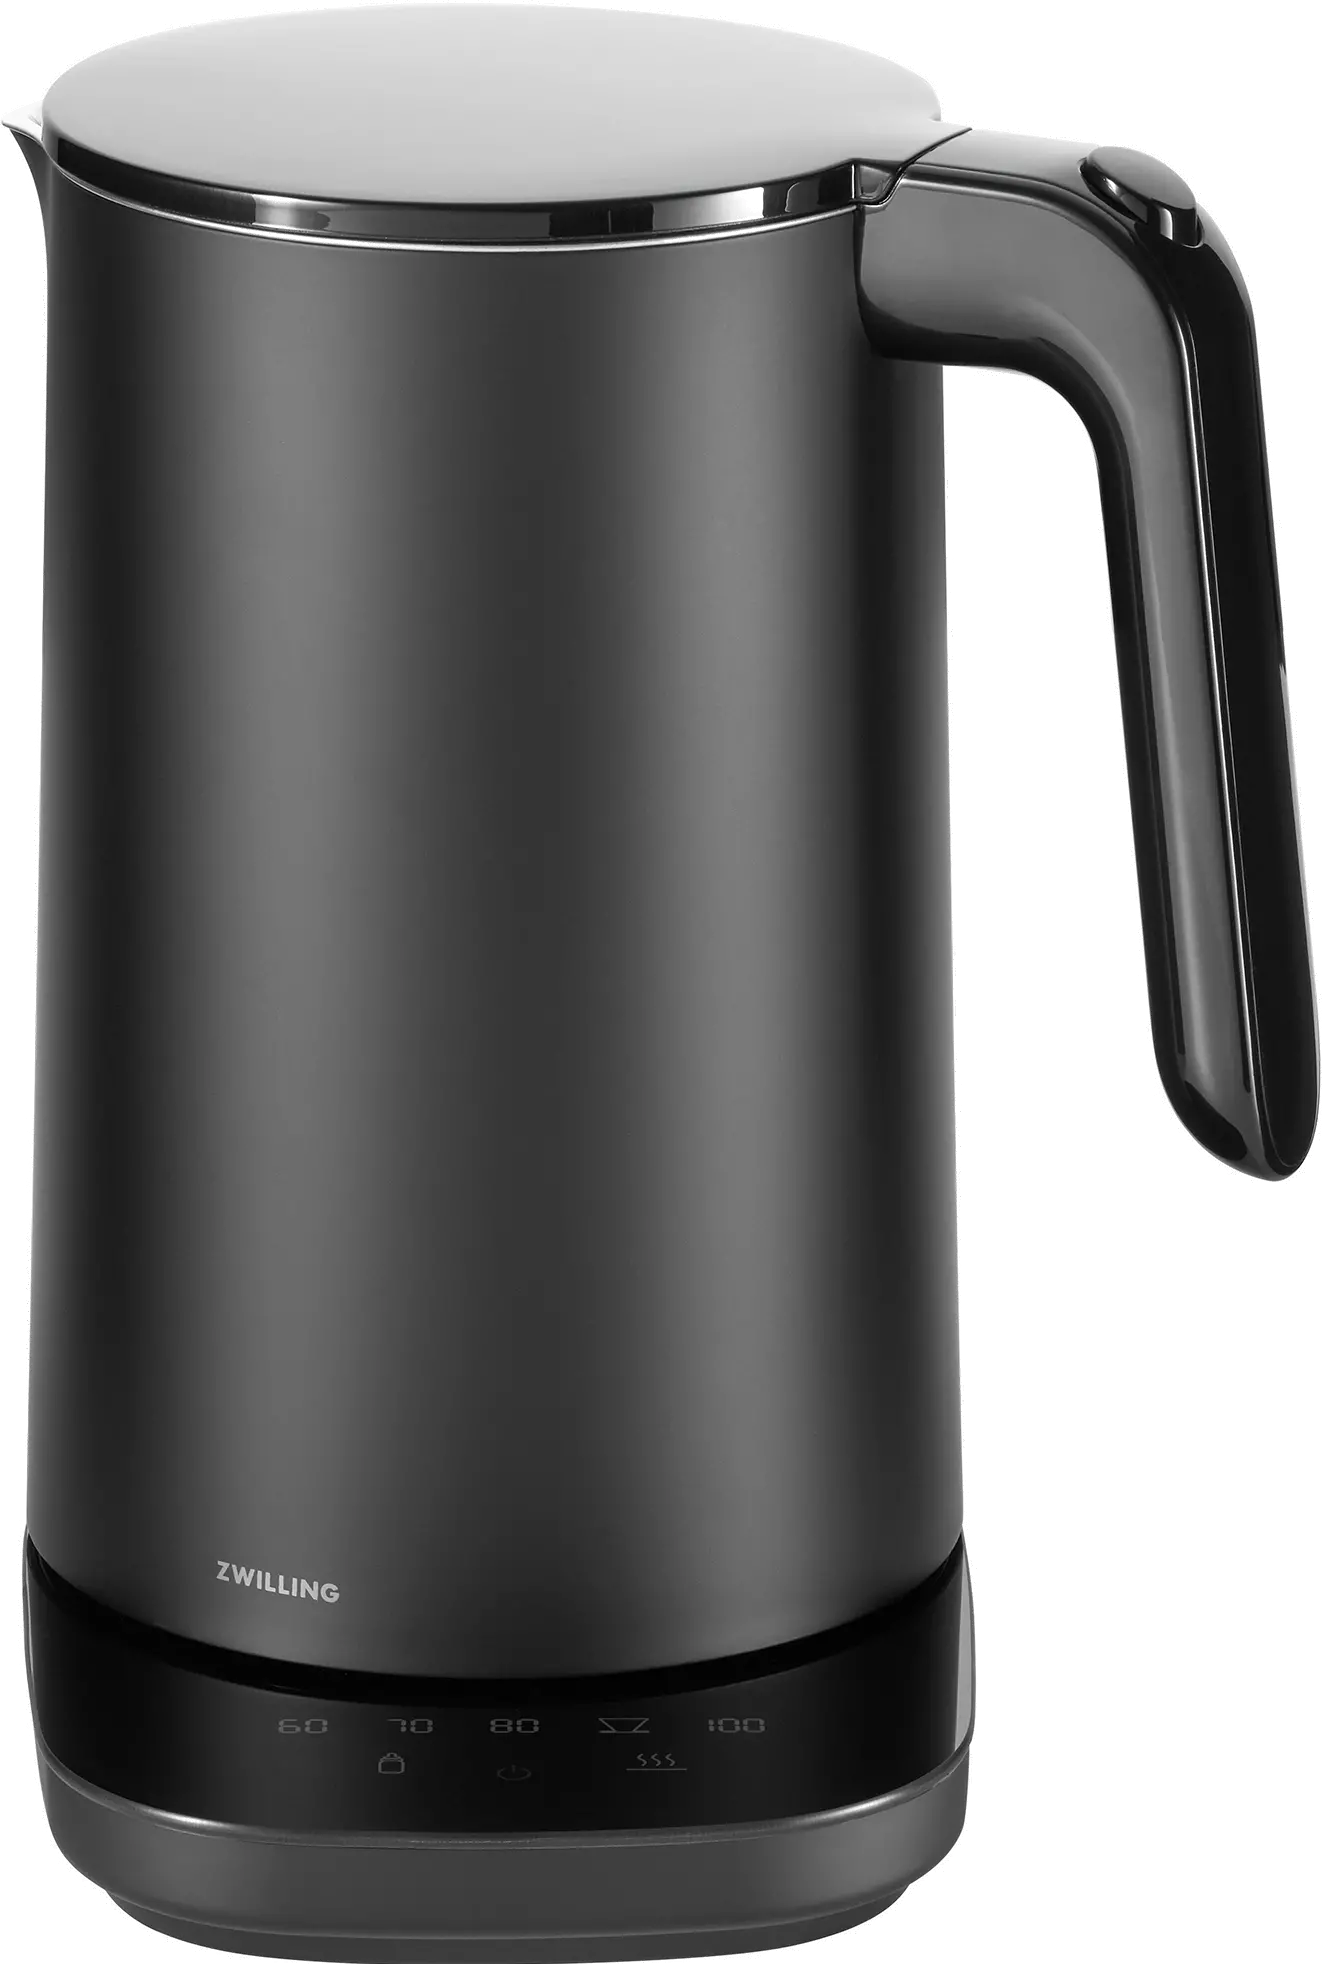 https://static.rcwilley.com/products/112935257/Zwilling-Enfinigy-1.56-qt-Cool-Touch-Stainless-Steel-Electric-Kettle---Black-rcwilley-image1.webp